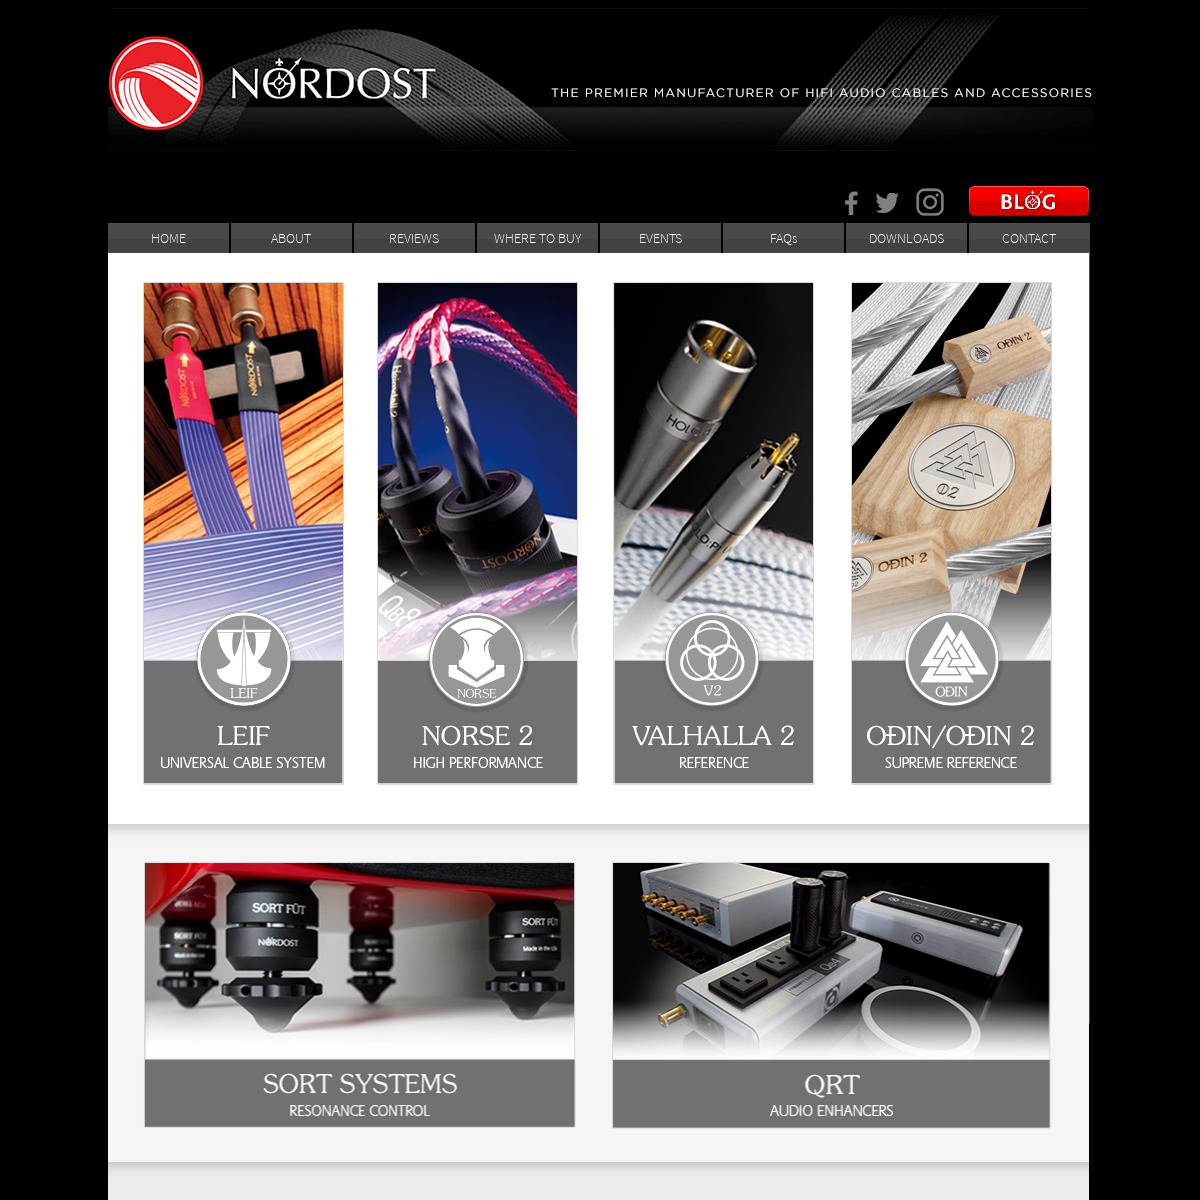 A complete backup of nordost.com